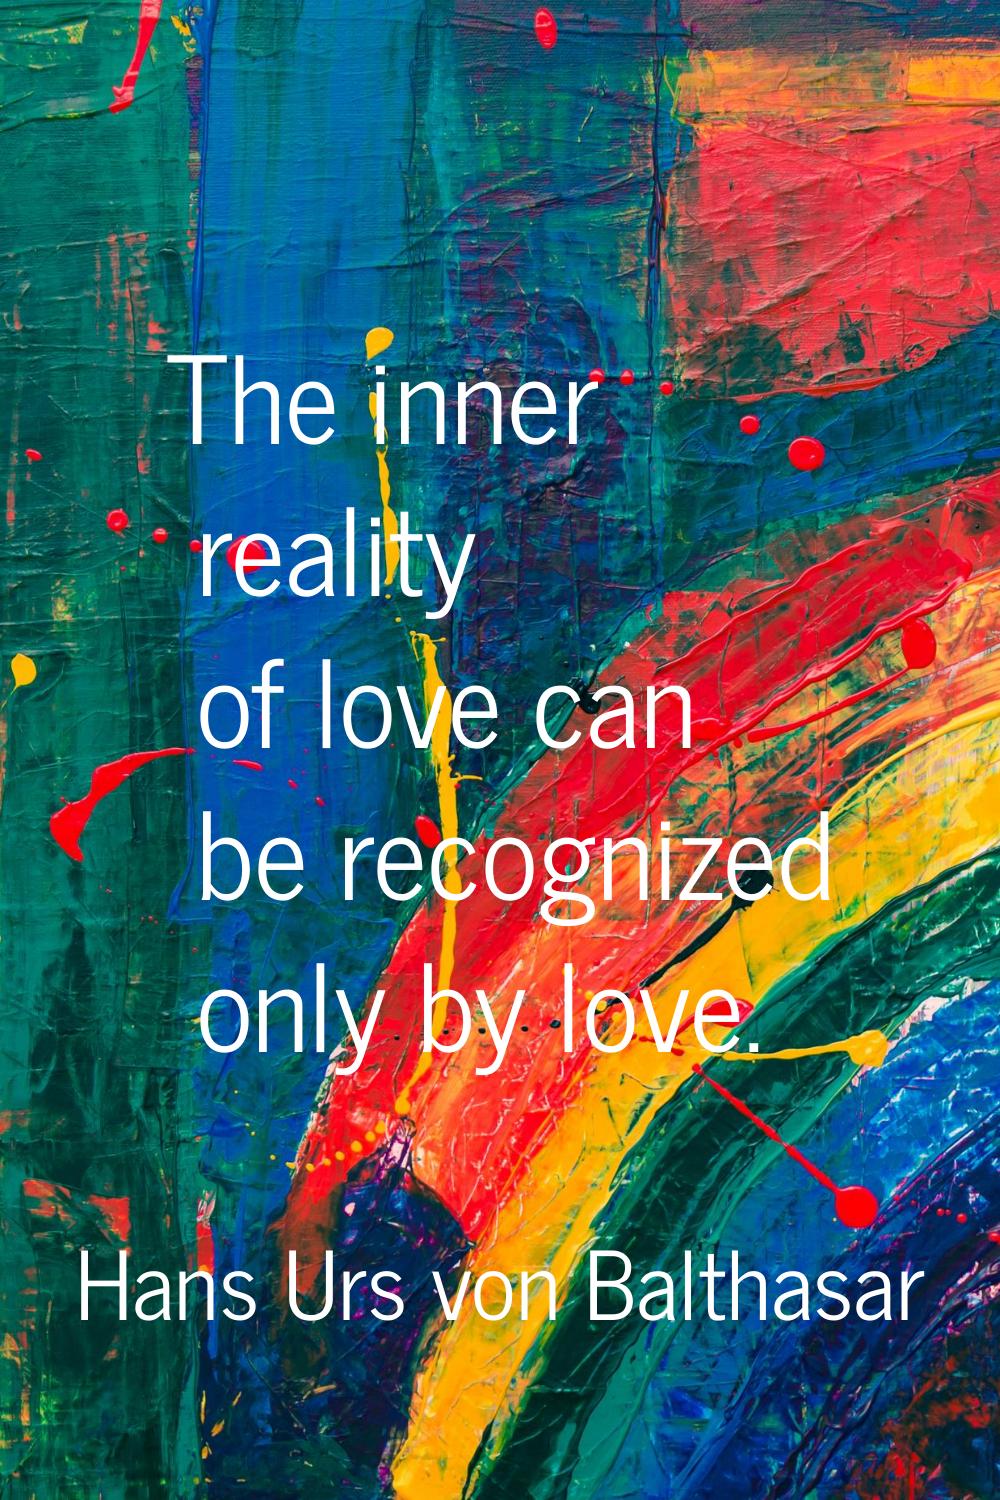 The inner reality of love can be recognized only by love.